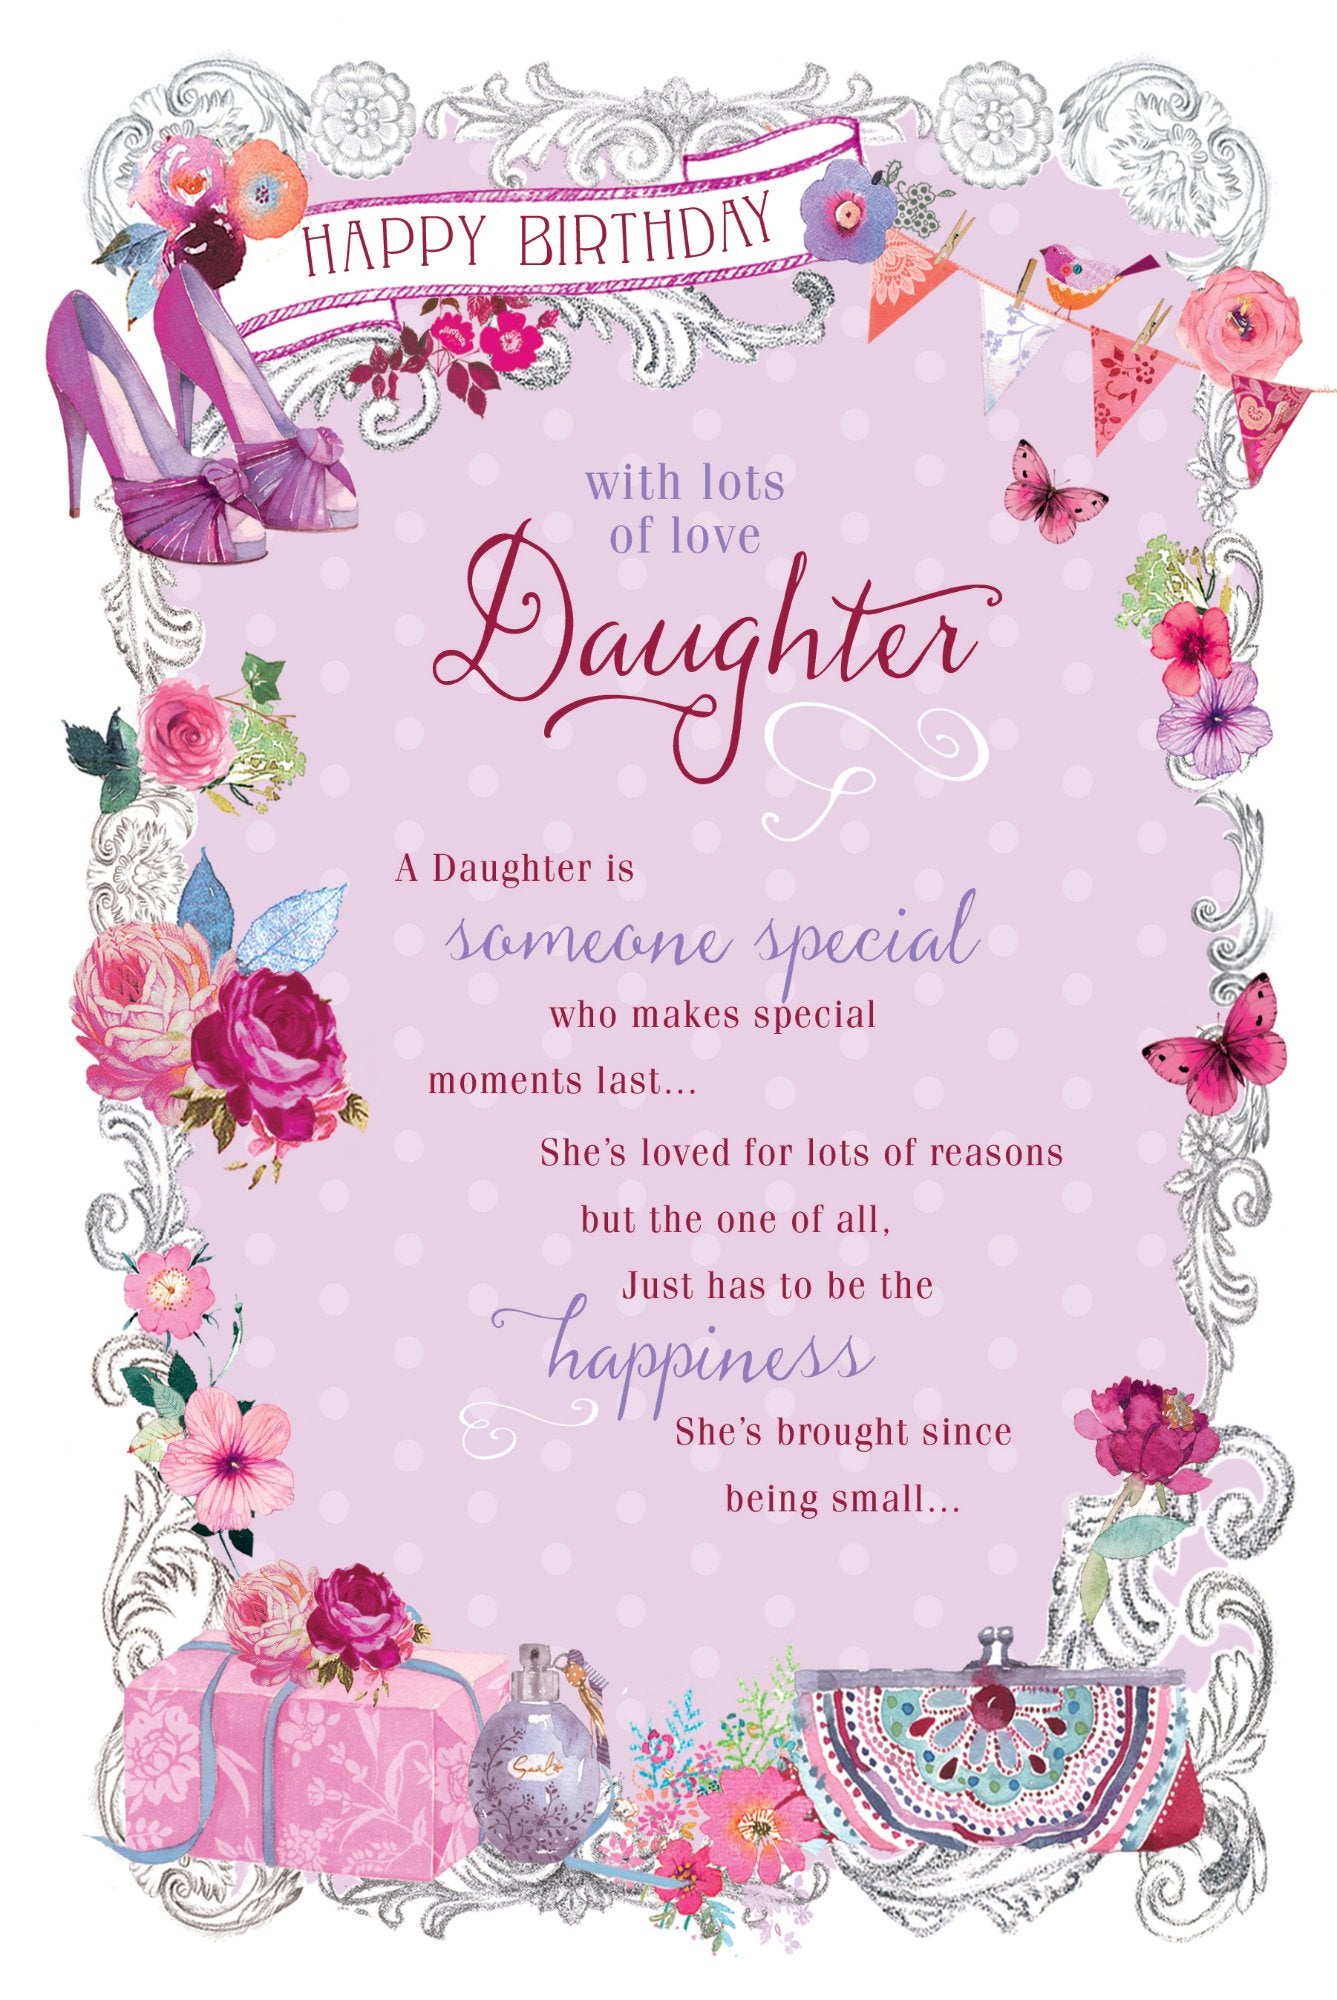 Photograph of Daughter Birthday Happiness Greetings Card at Nicole's Shop